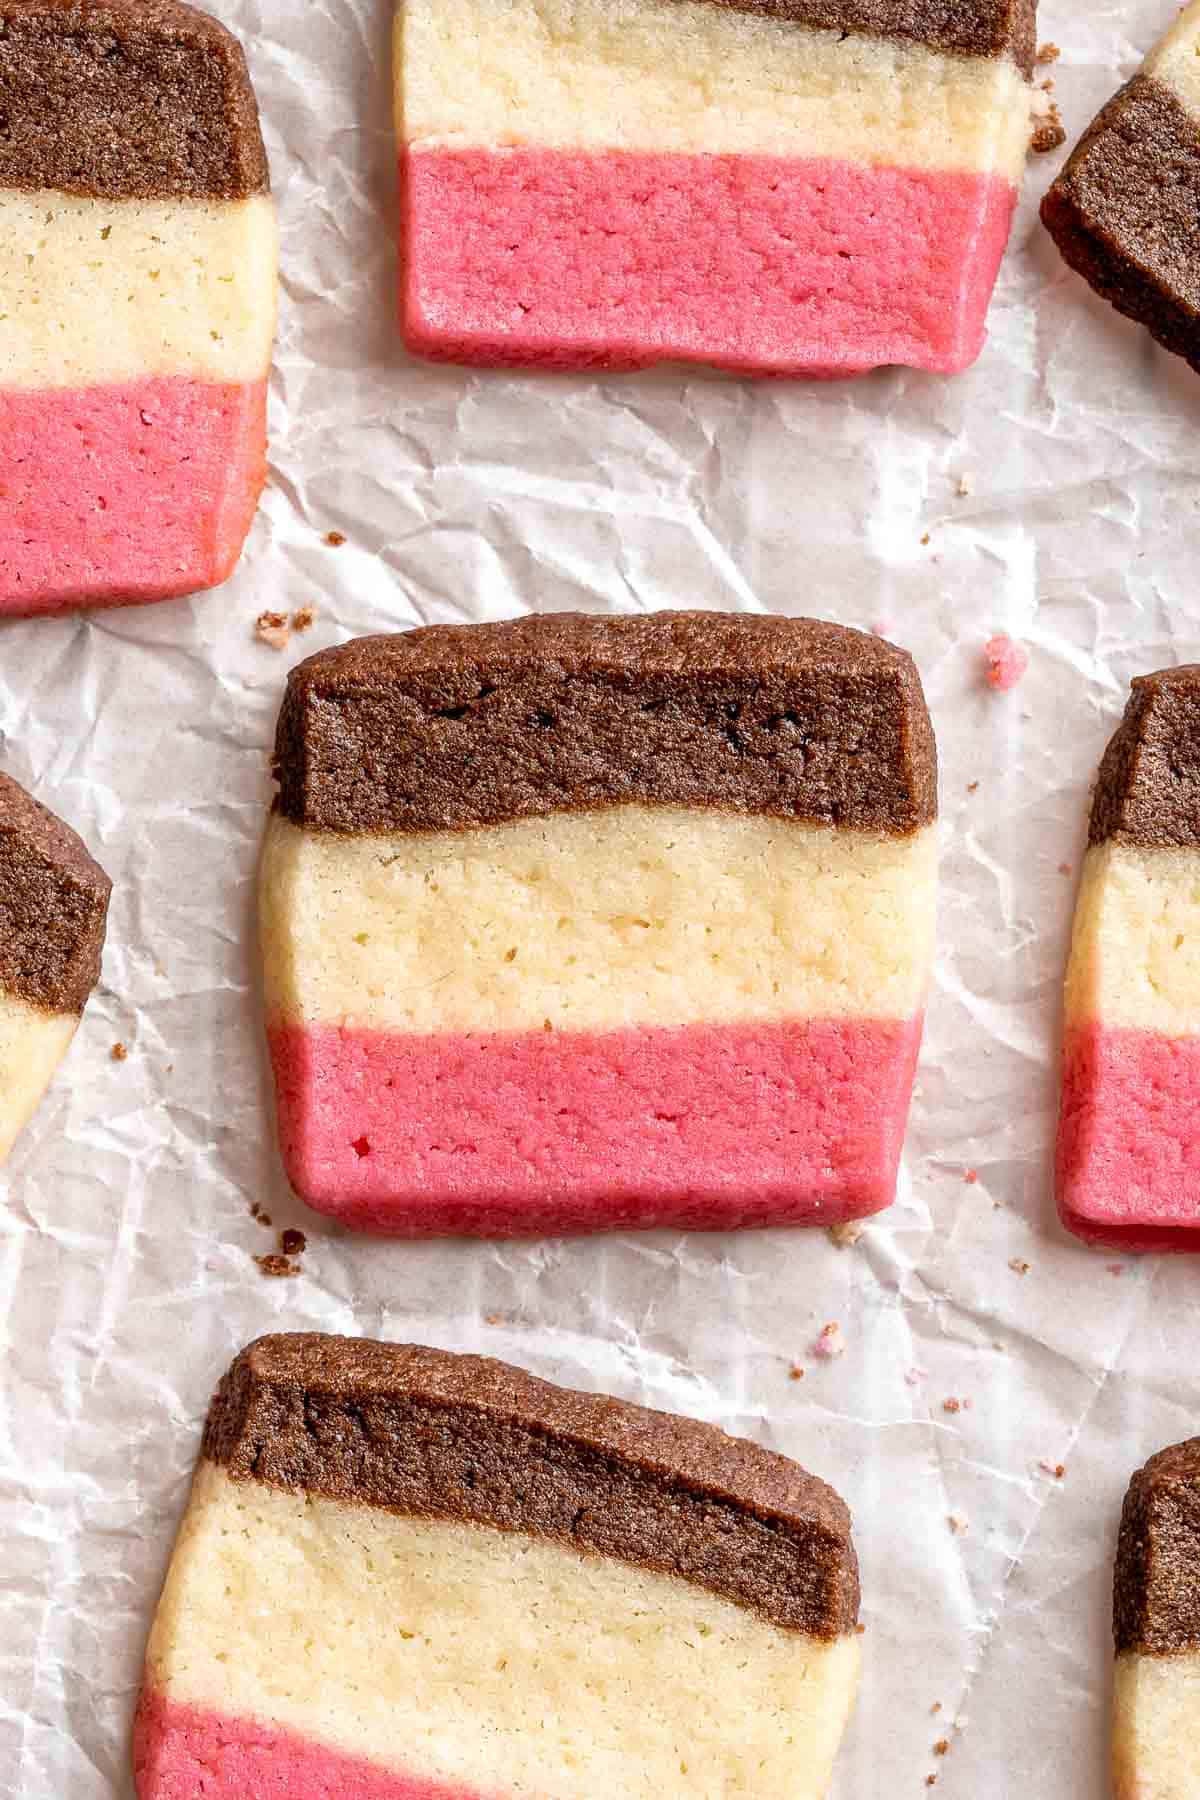 With their iconic pink, brown, and white stripes, these homemade Neapolitan Cookies are both beautiful and delicious. Made with 3 flavors in one dough! | aheadofthyme.com